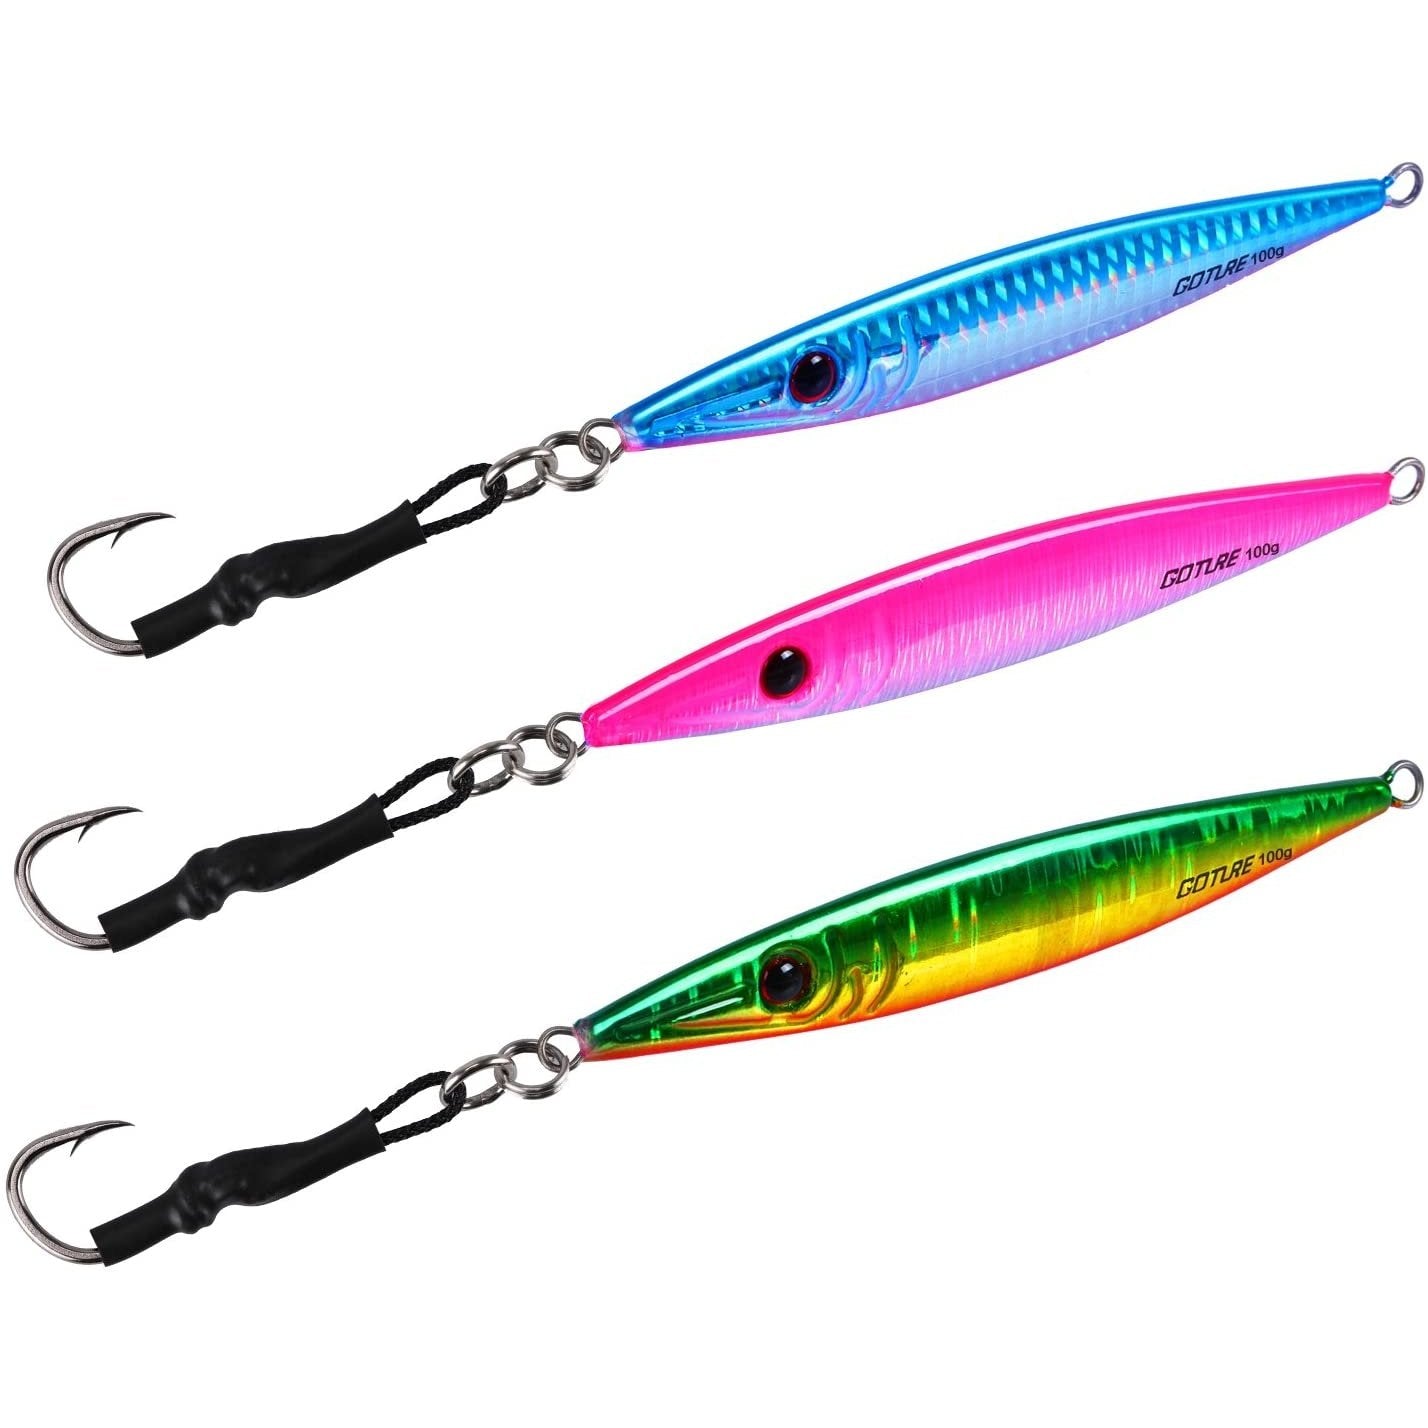 Streamline 3D Saltwater Jig Lures with Glow Effect – GOTURE